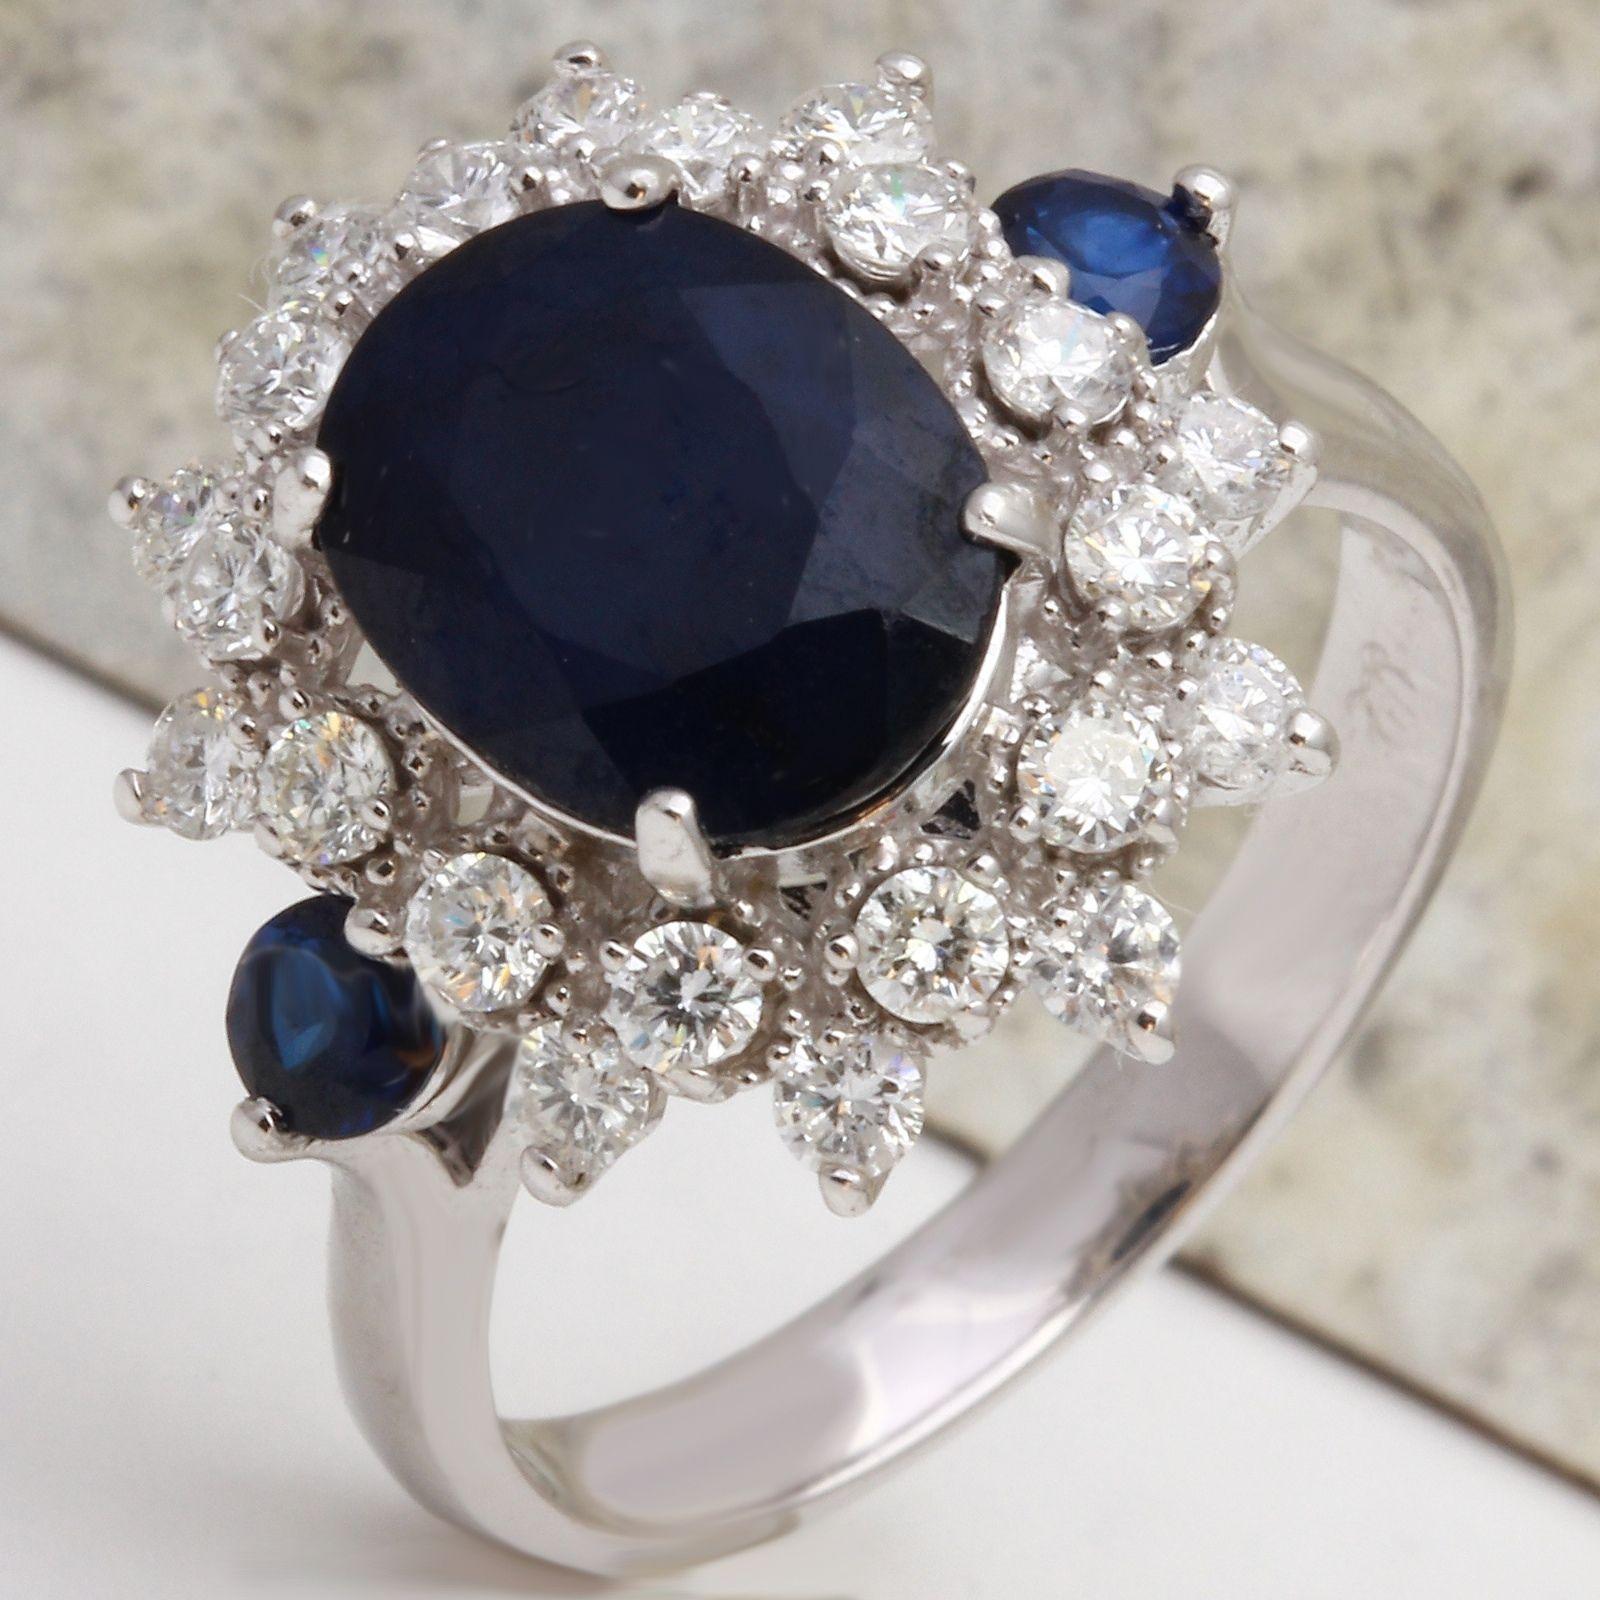 4.30 Carats Exquisite Natural Blue Sapphire and Diamond 14K Solid White Gold Ring

Total Natural Blue Sapphire Weights: 3.80 Carats

Sapphire Measures: 10 x 8mm

Sapphire Treatment: Diffusion

Natural Round Diamonds Weight: .50 Carats (color G-H /